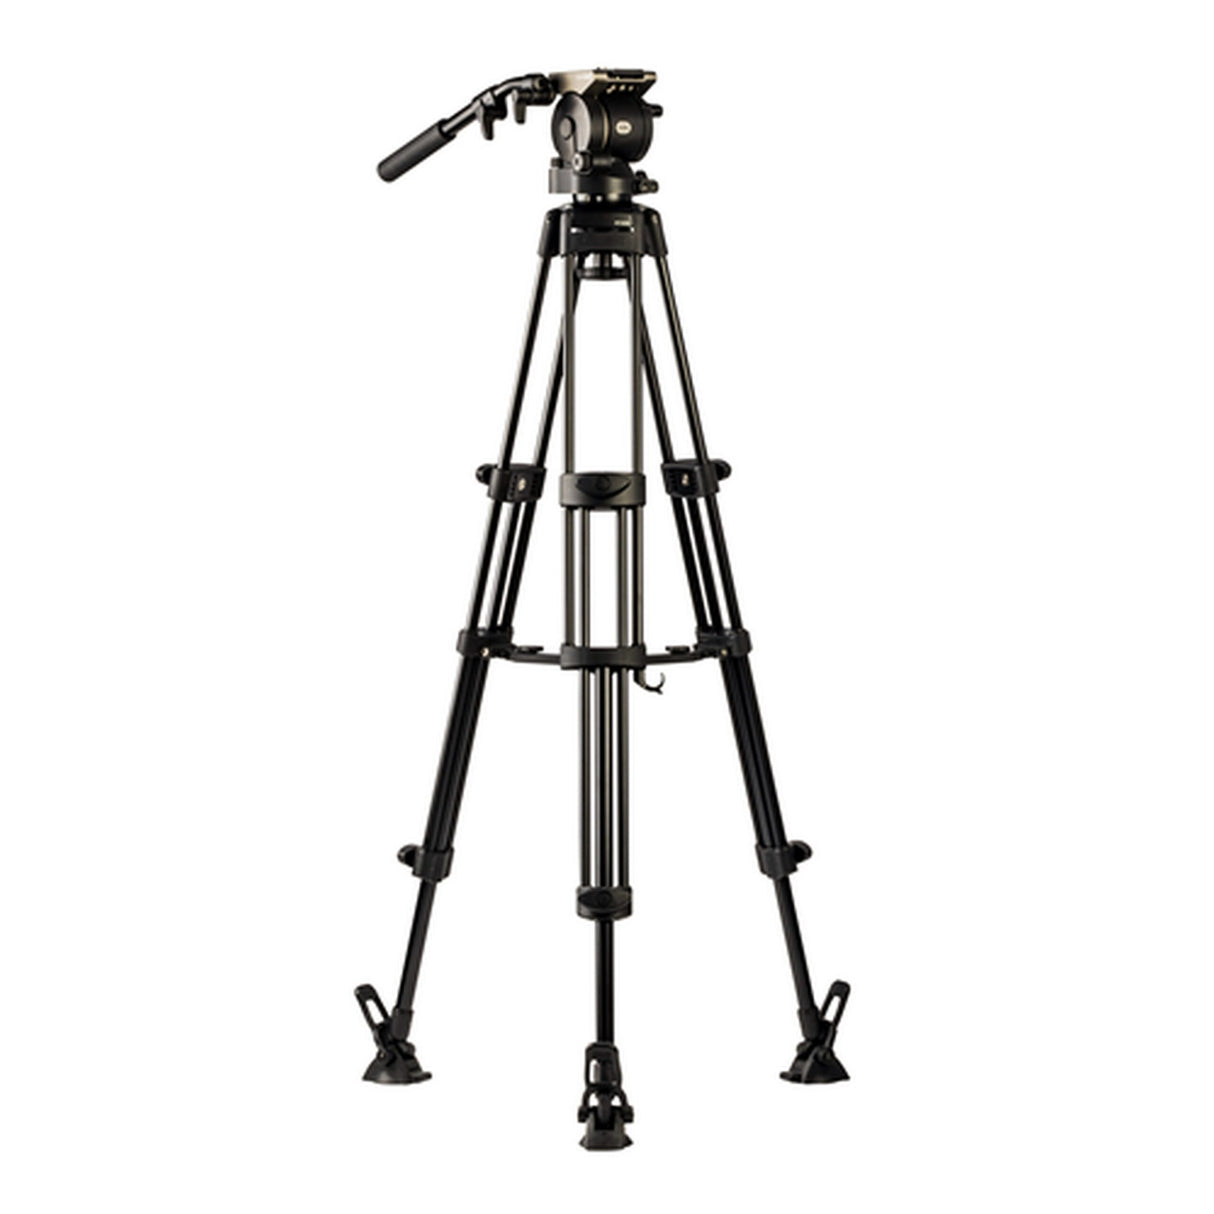 Libec HS-350M Dual Head Tripod System with Mid-Level Spreader